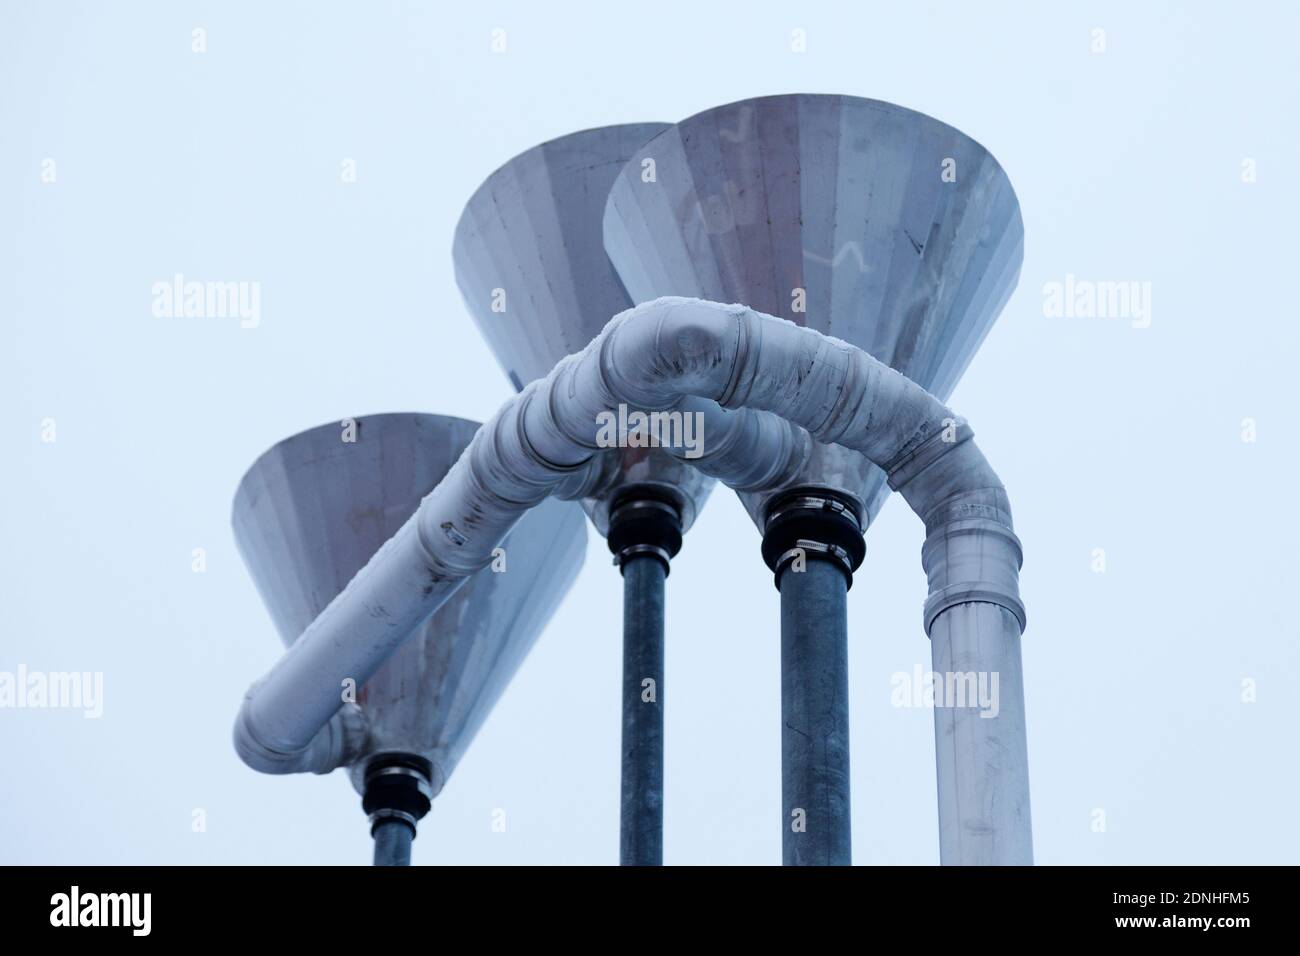 funnels and pipes associated with gas station pumps Stock Photo